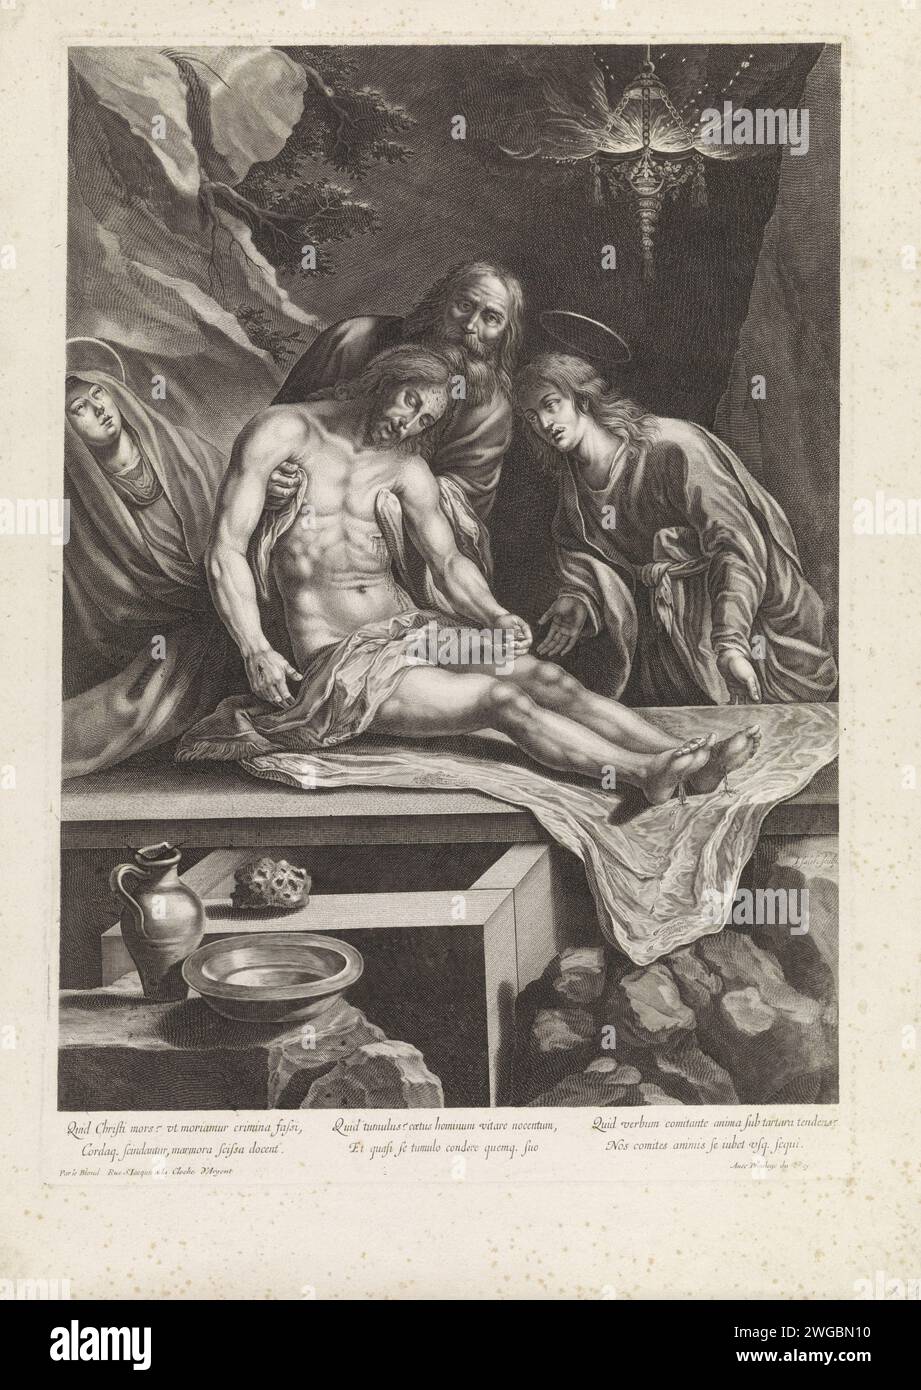 Graphing, Jeremias Falck, 1639 - 1646 print Joseph of Arimatea puts the body of Christ on a table in the presence of the two Maria's. In the foreground one can, a bowl and a sponge. Under the show a inscription in Latin. print maker: Parispublisher: ParisFrance paper engraving Christ's entombment (possibly by angels) Stock Photo